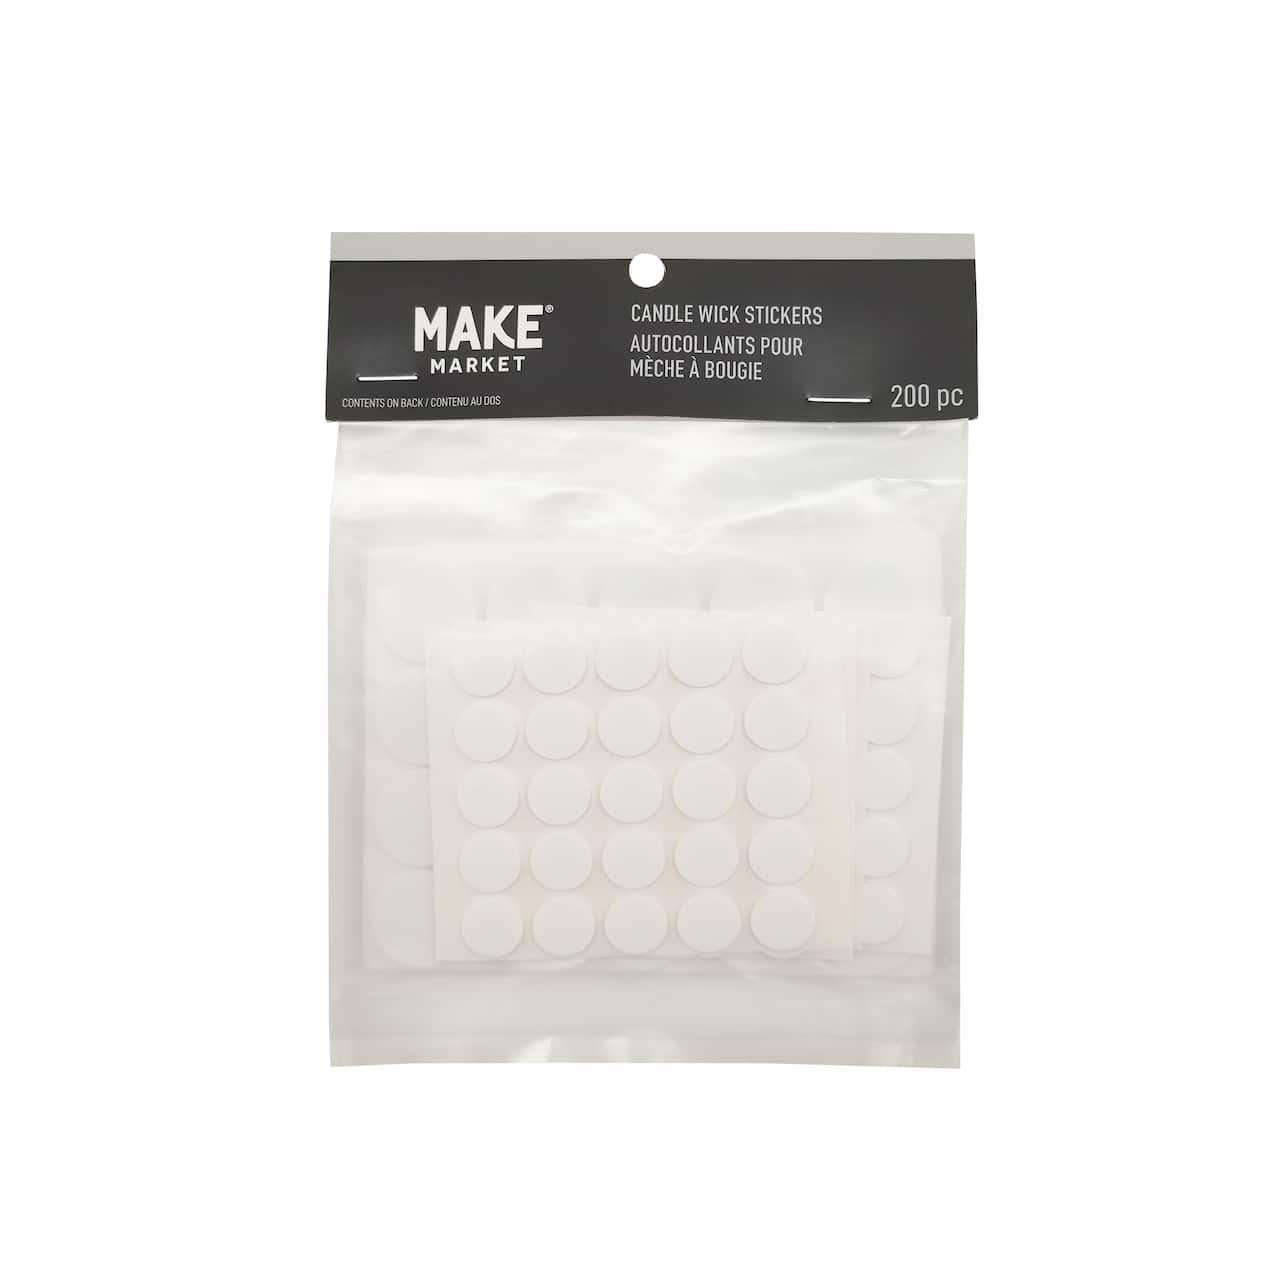 12 Packs: 200 ct. (2,400 total) Candle Wick Stickers by Make Market&#xAE;